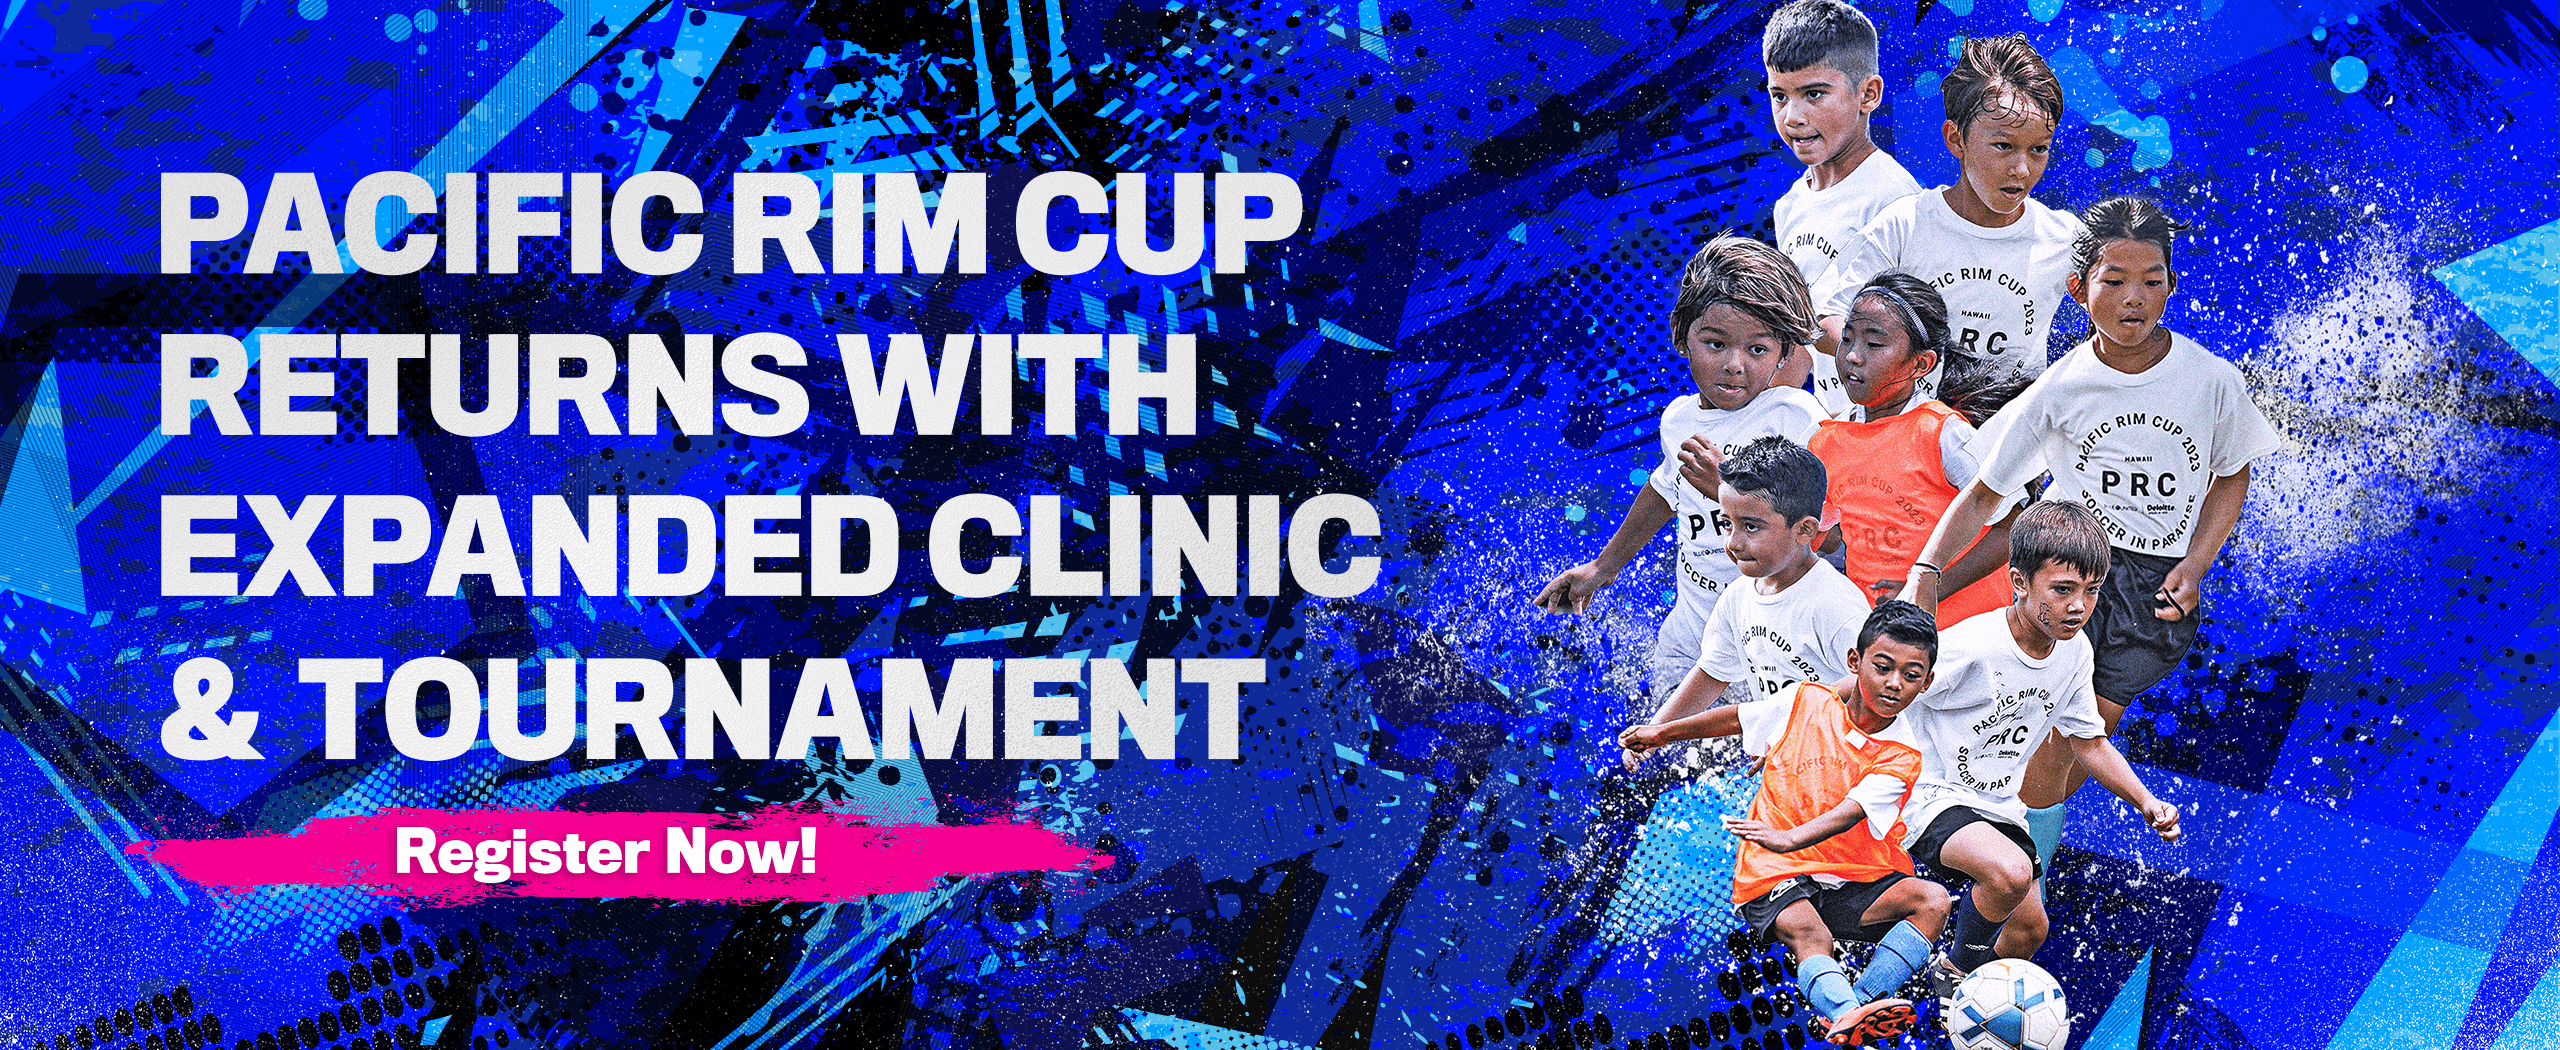 PACIFIC RIM CUP RETURNS WITH EXPANDED CLINIC & TOURNAMENT Registration opens on May 1!